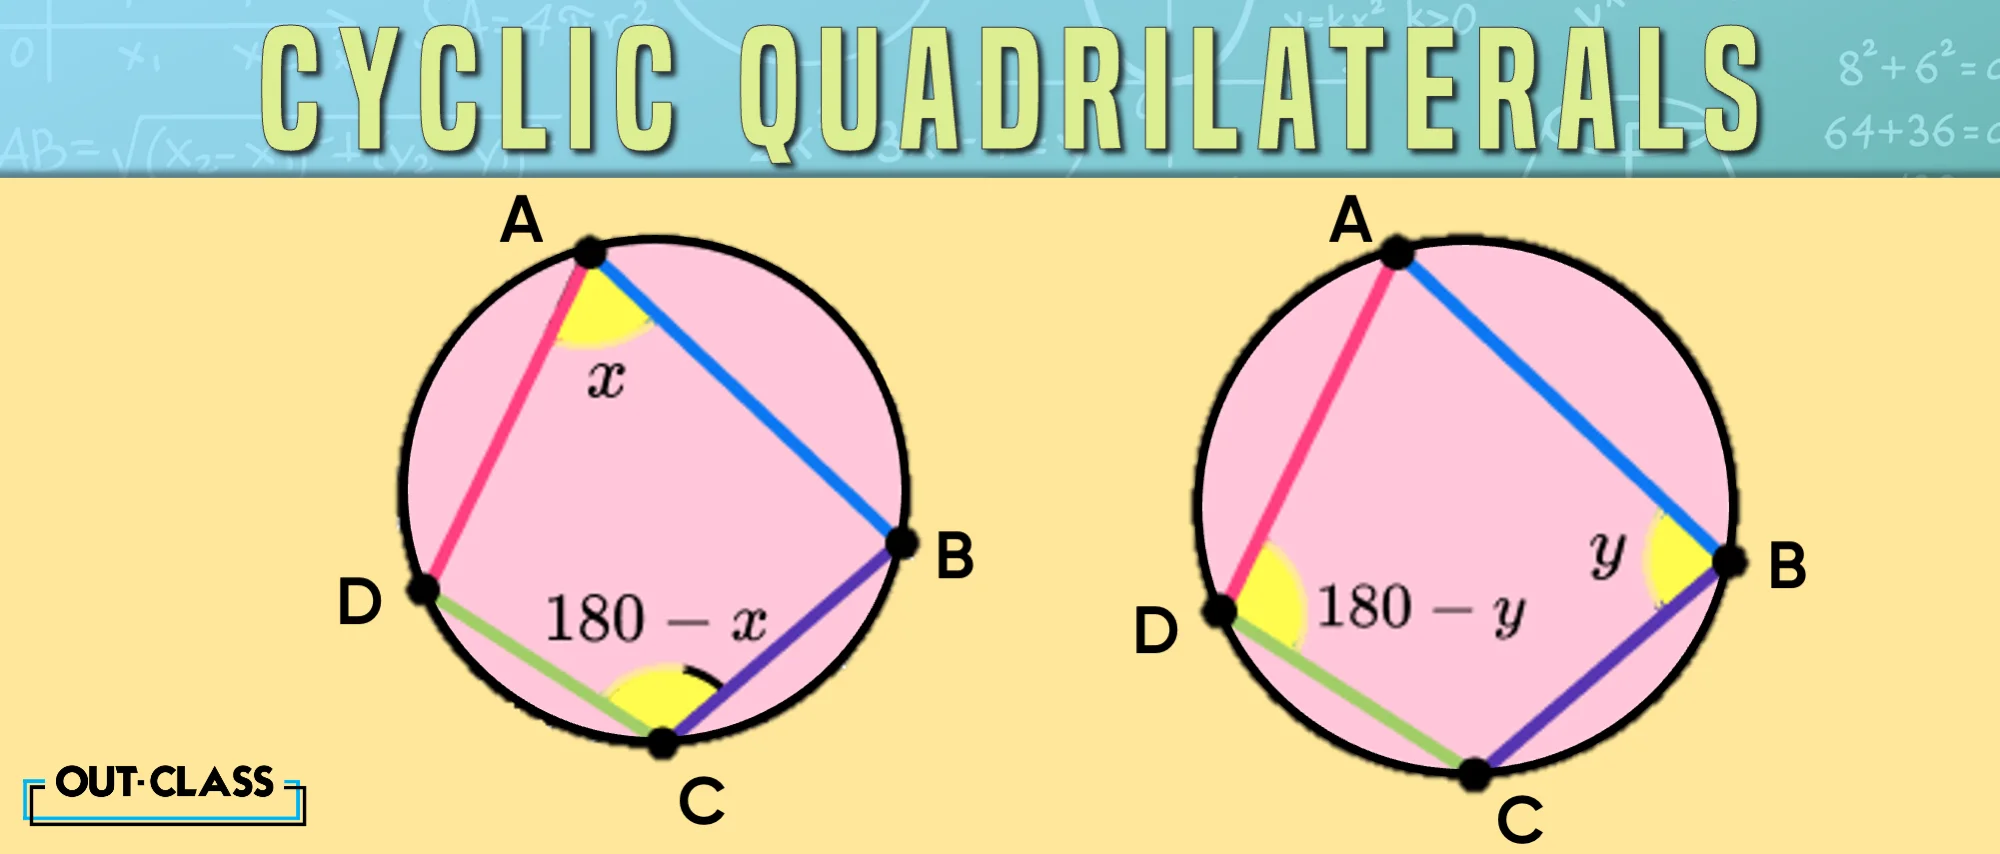 Cyclic quadrilateral is one nof the properties of a circle.